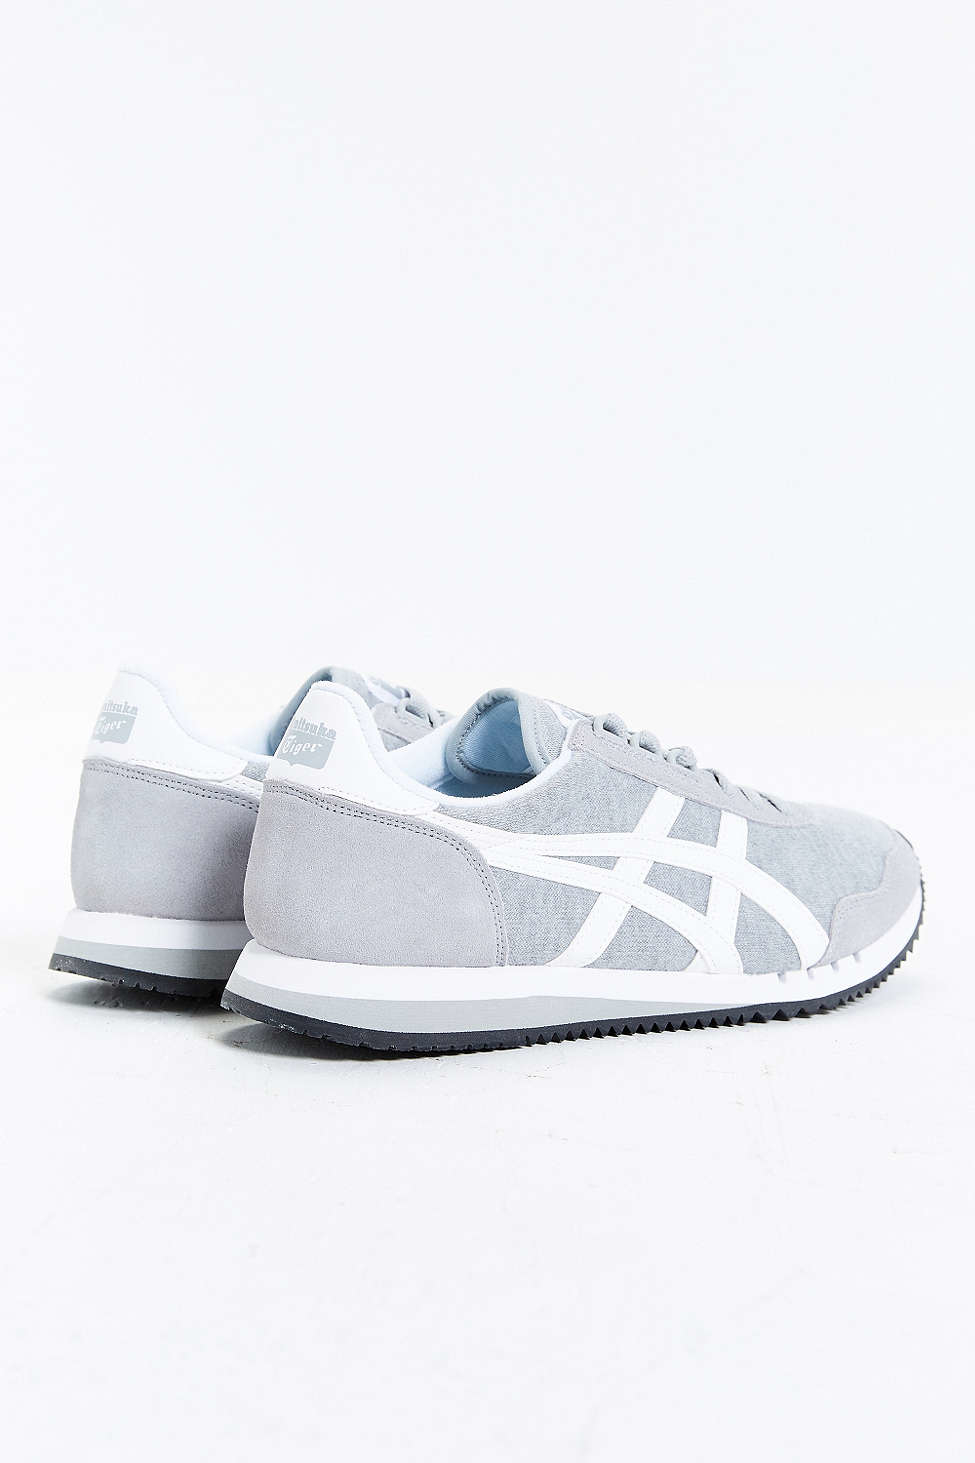 Asics Rubber Onitsuka Tiger Dualio Sneaker in Grey (Gray) for Men - Lyst